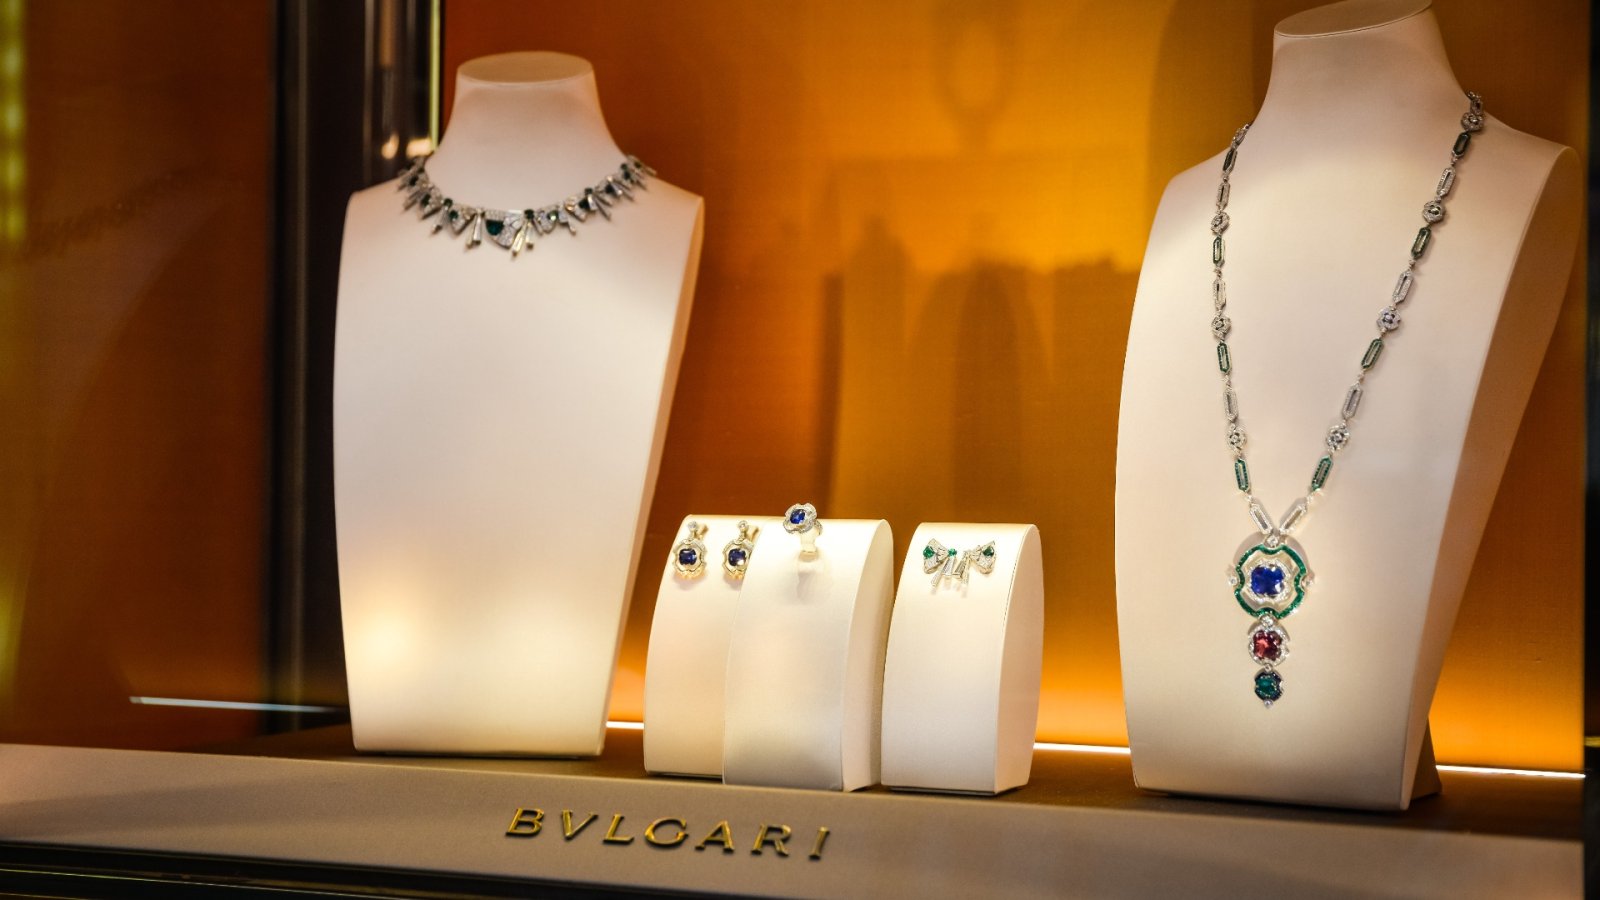 Bulgari high jewels on exhibit in NYC: discover the symbol of rebirth